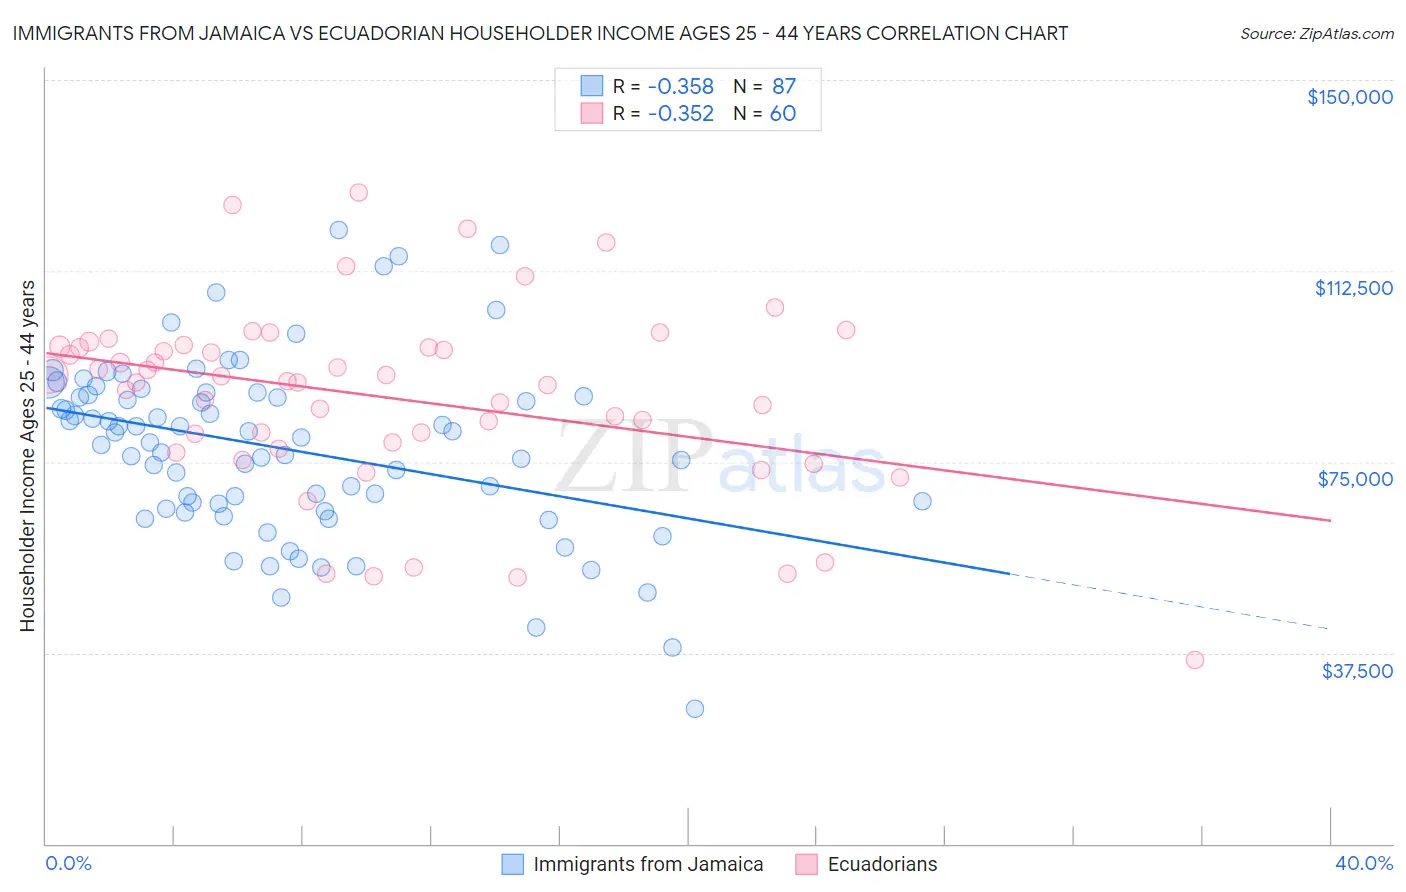 Immigrants from Jamaica vs Ecuadorian Householder Income Ages 25 - 44 years